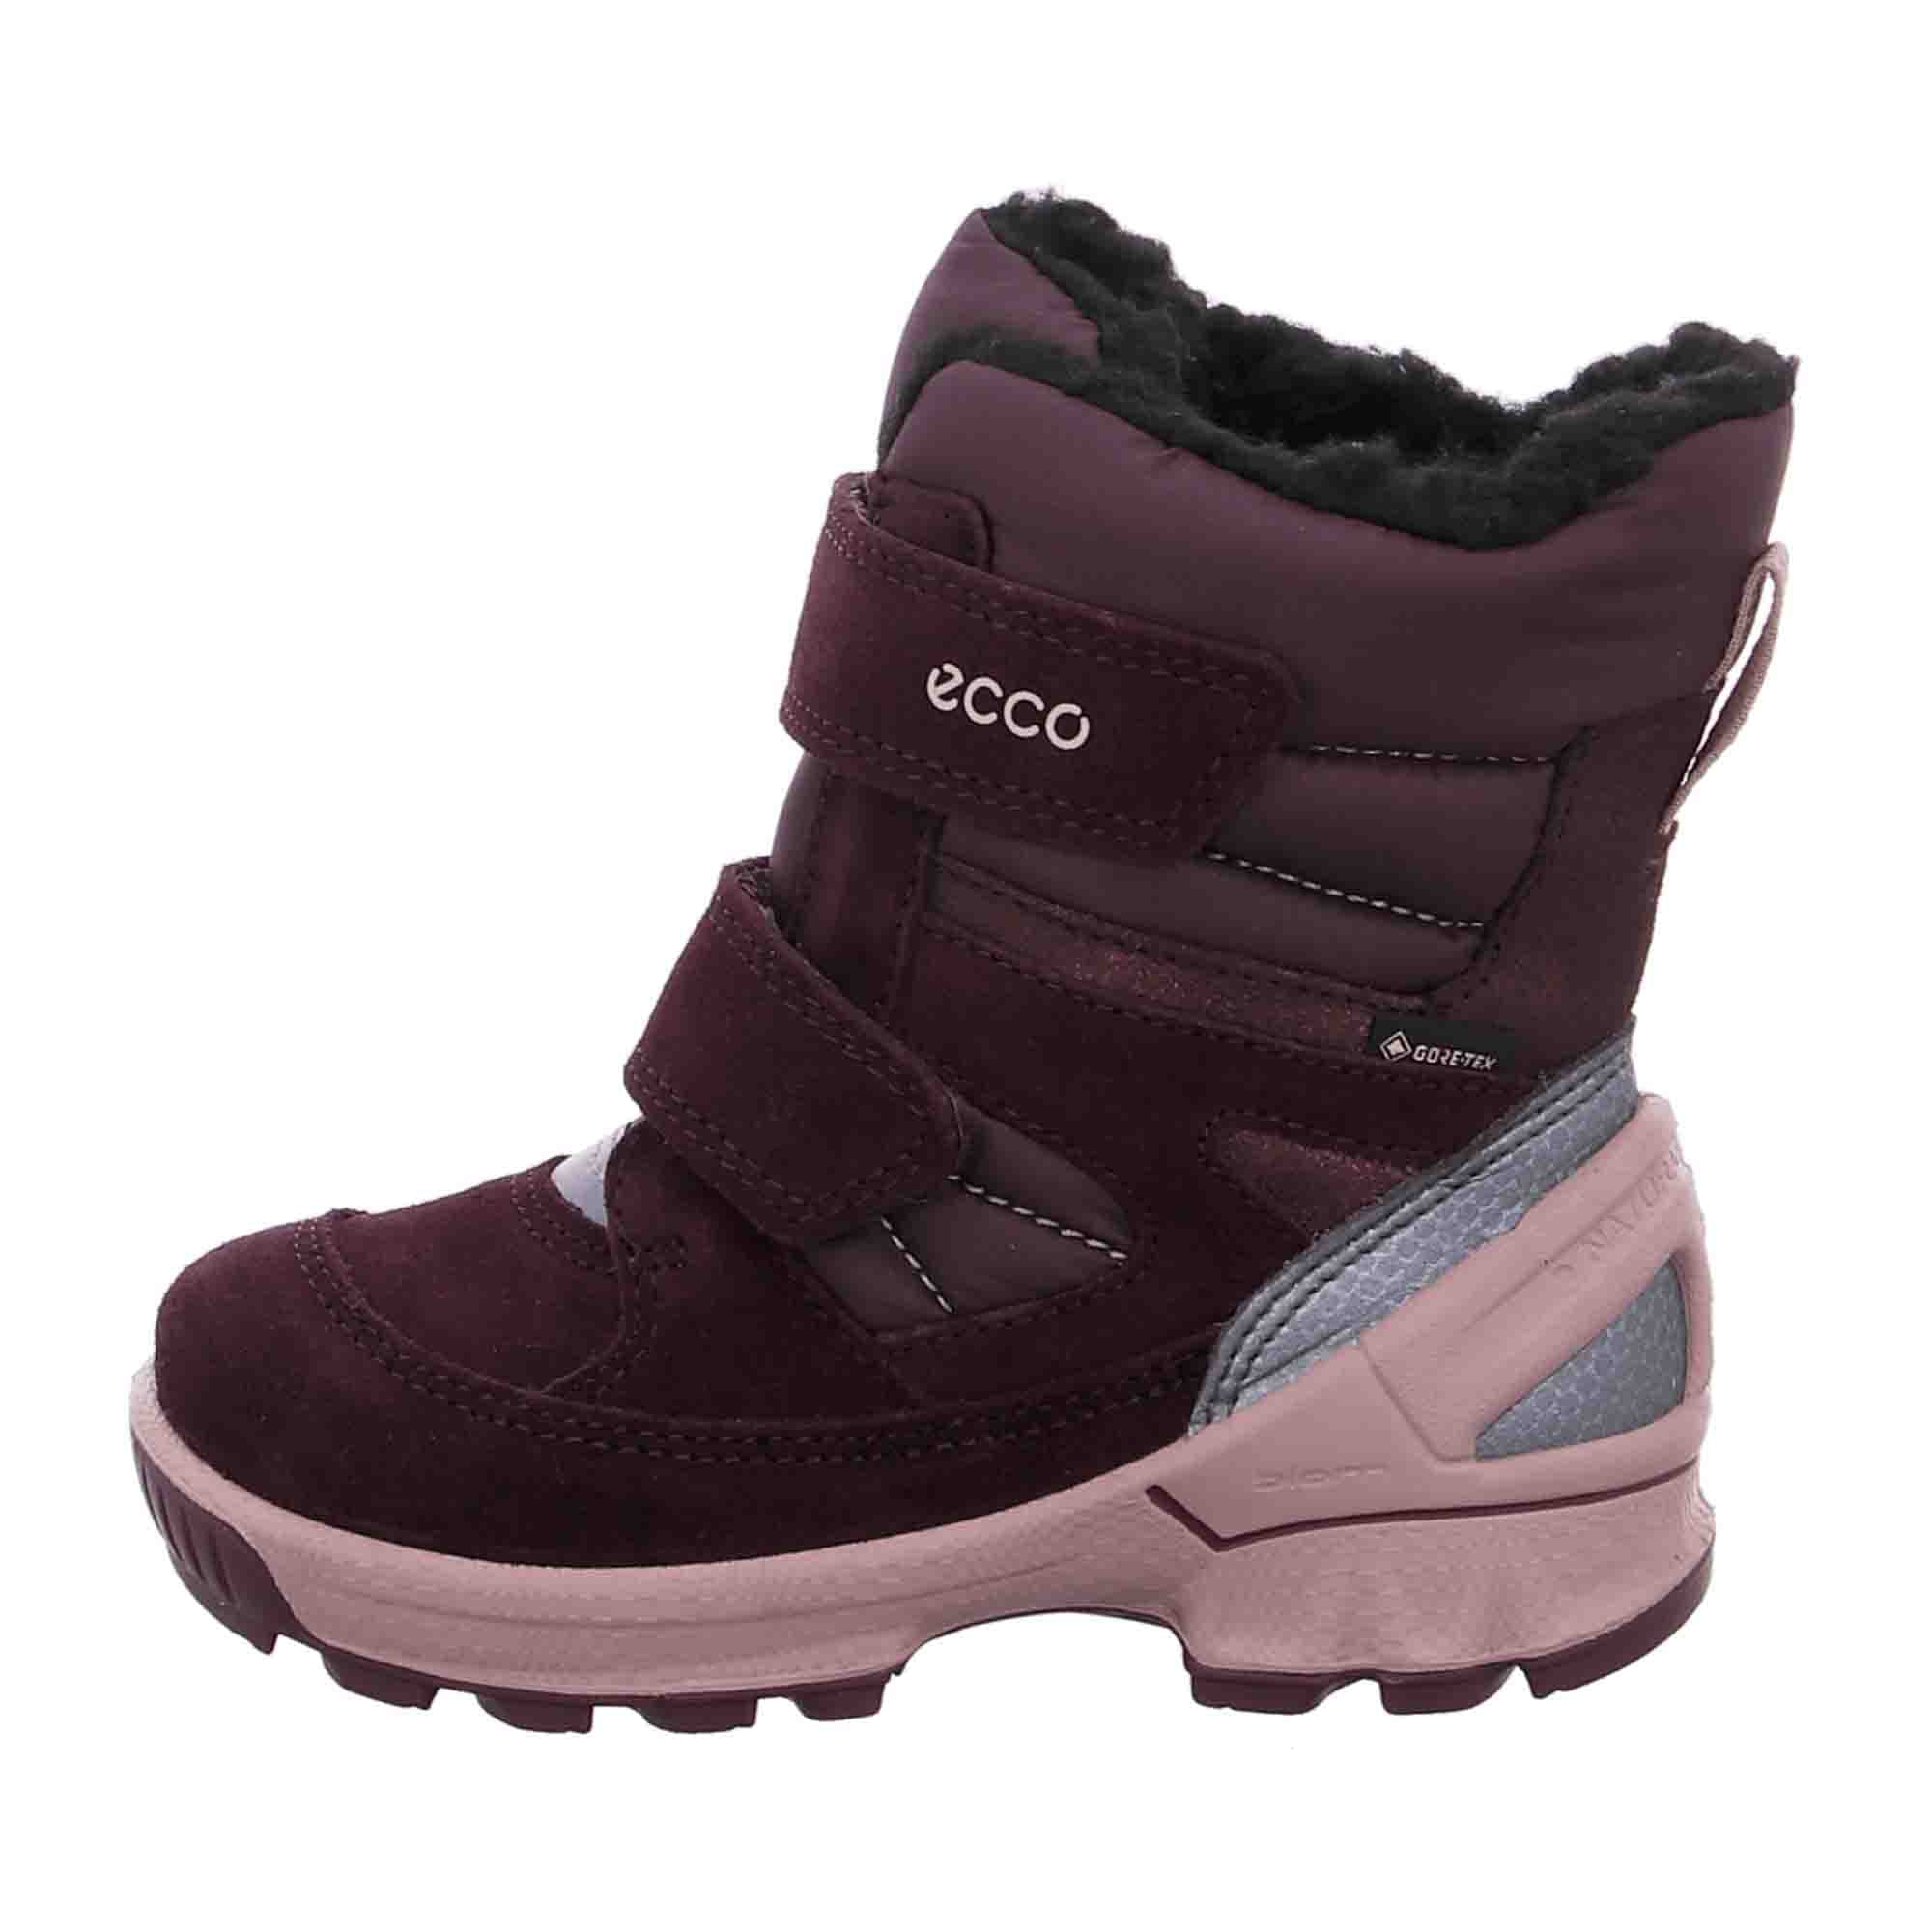 Ecco BIOM HIKE INFANT Kids' Hiking Boots - Durable and Stylish Footwear in Brown